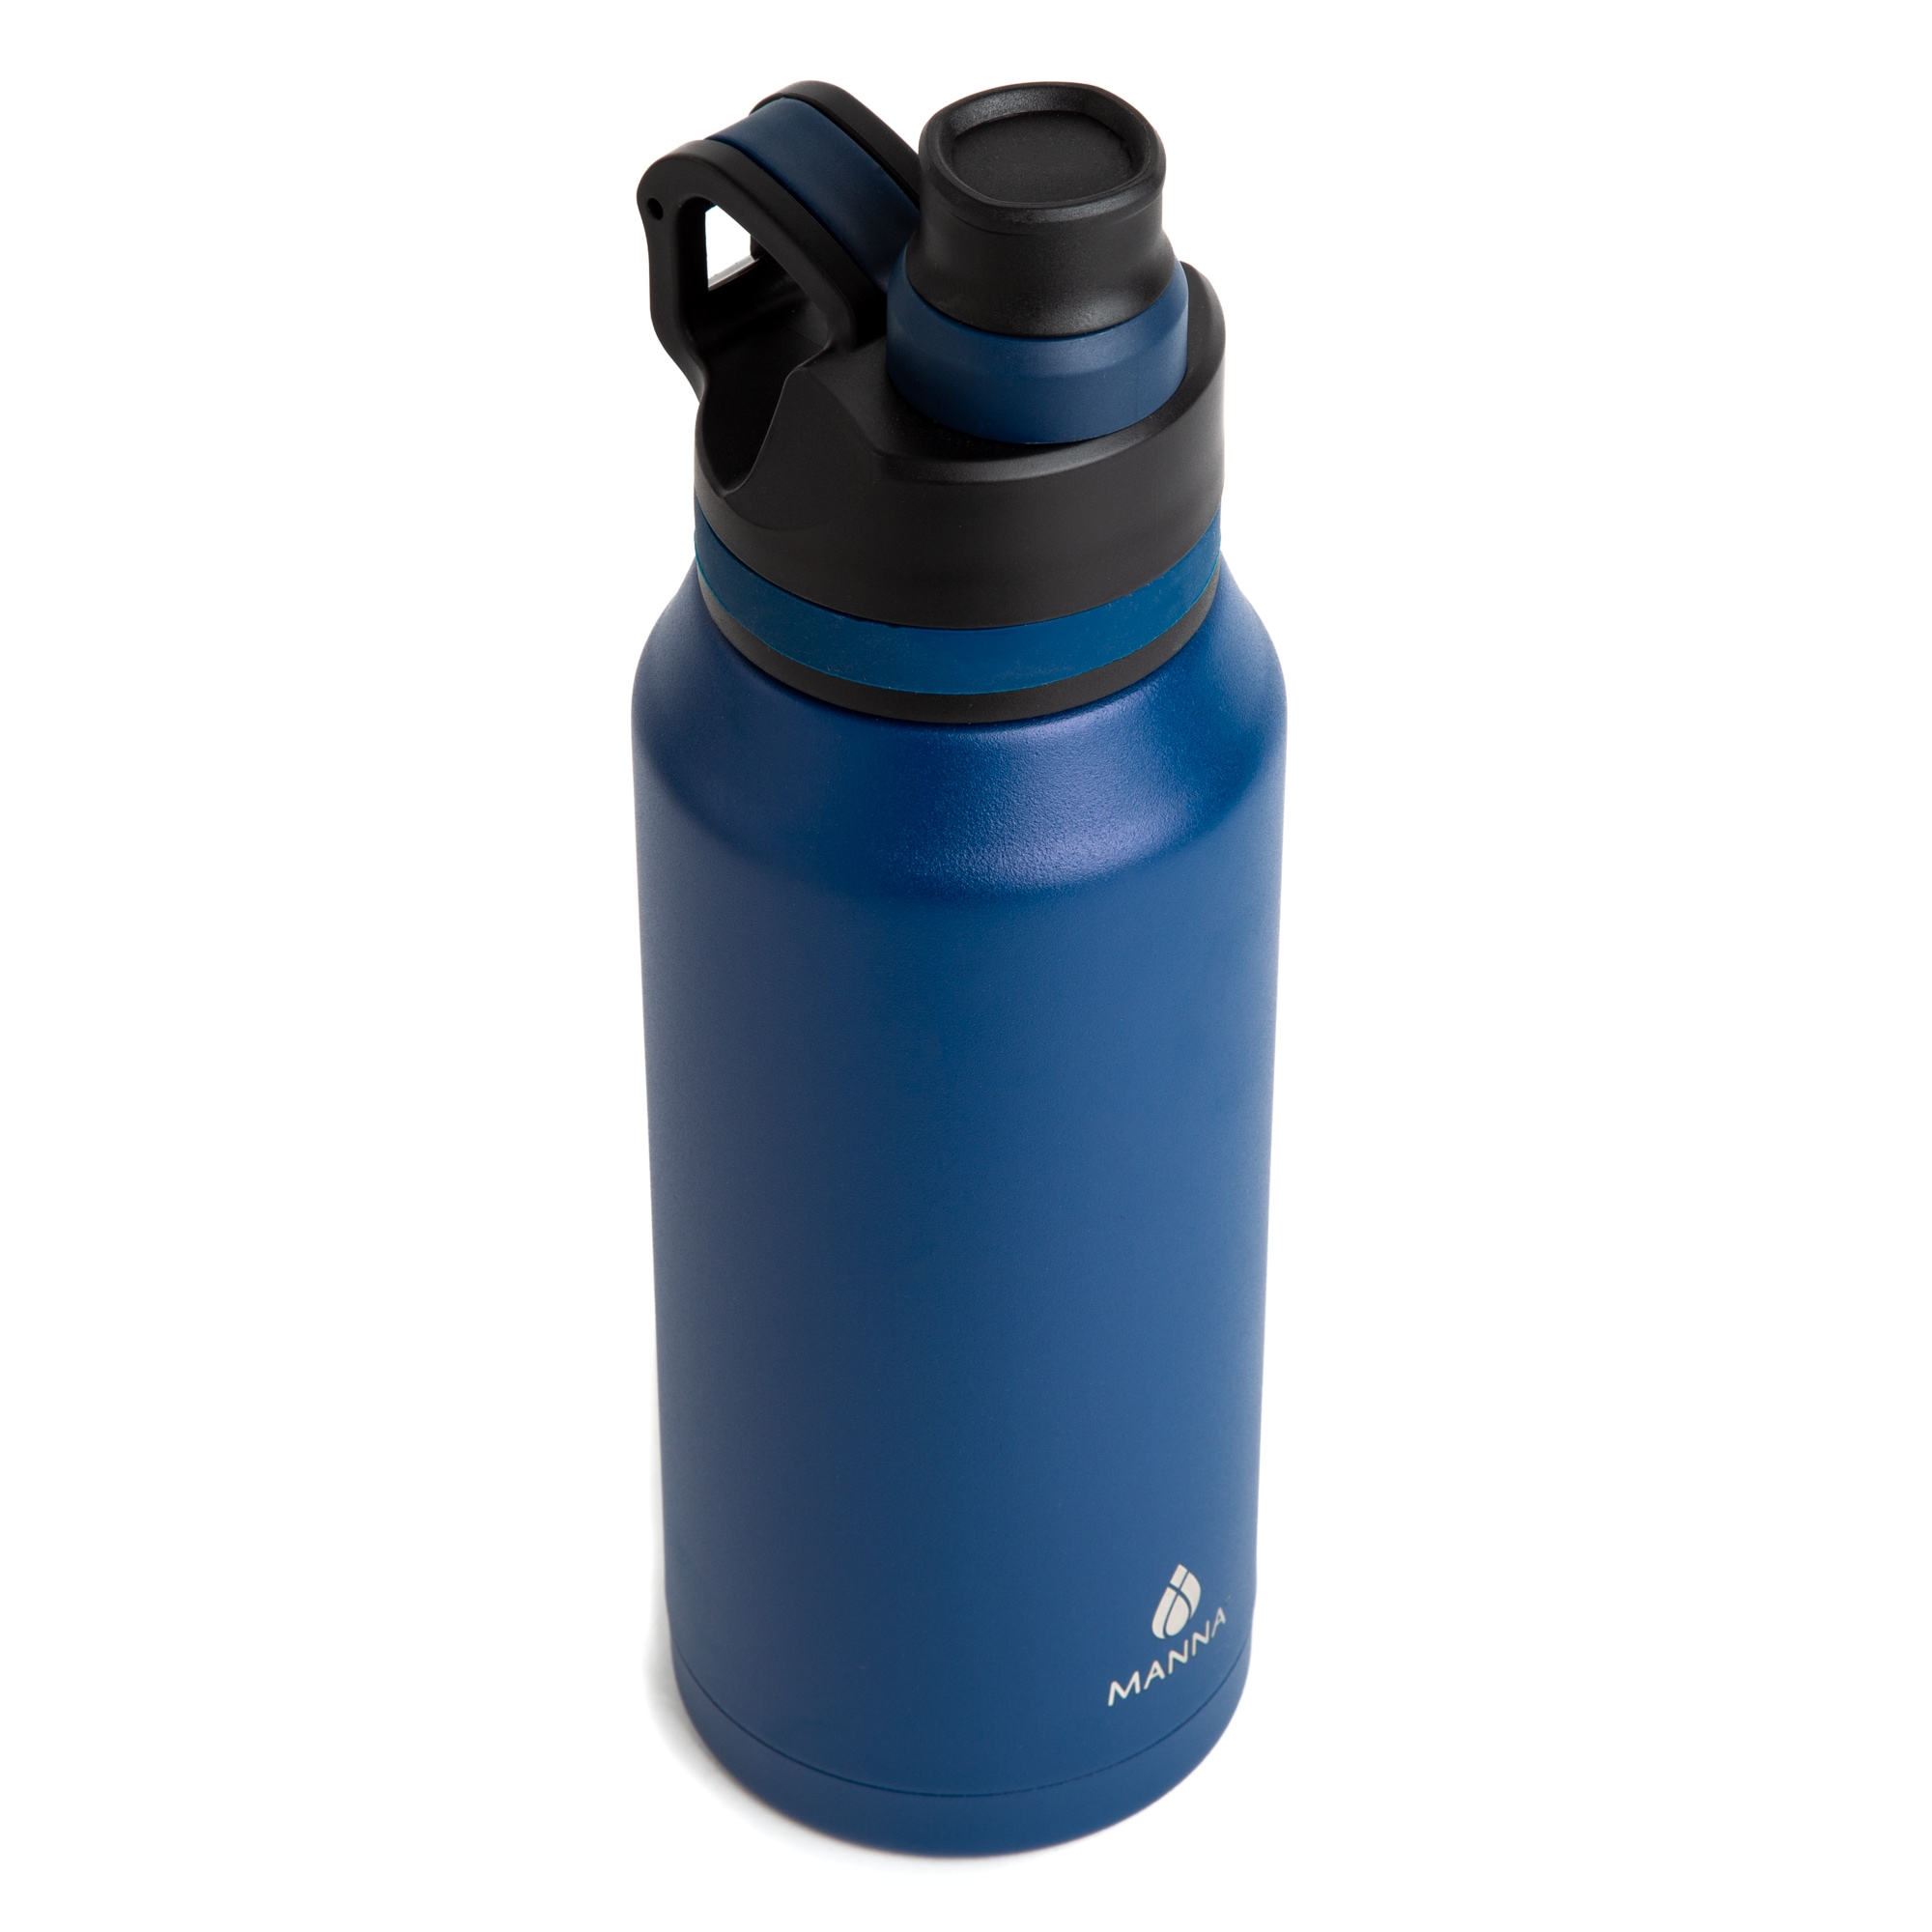 Manna 32-fl oz Stainless Steel Insulated Water Bottle at